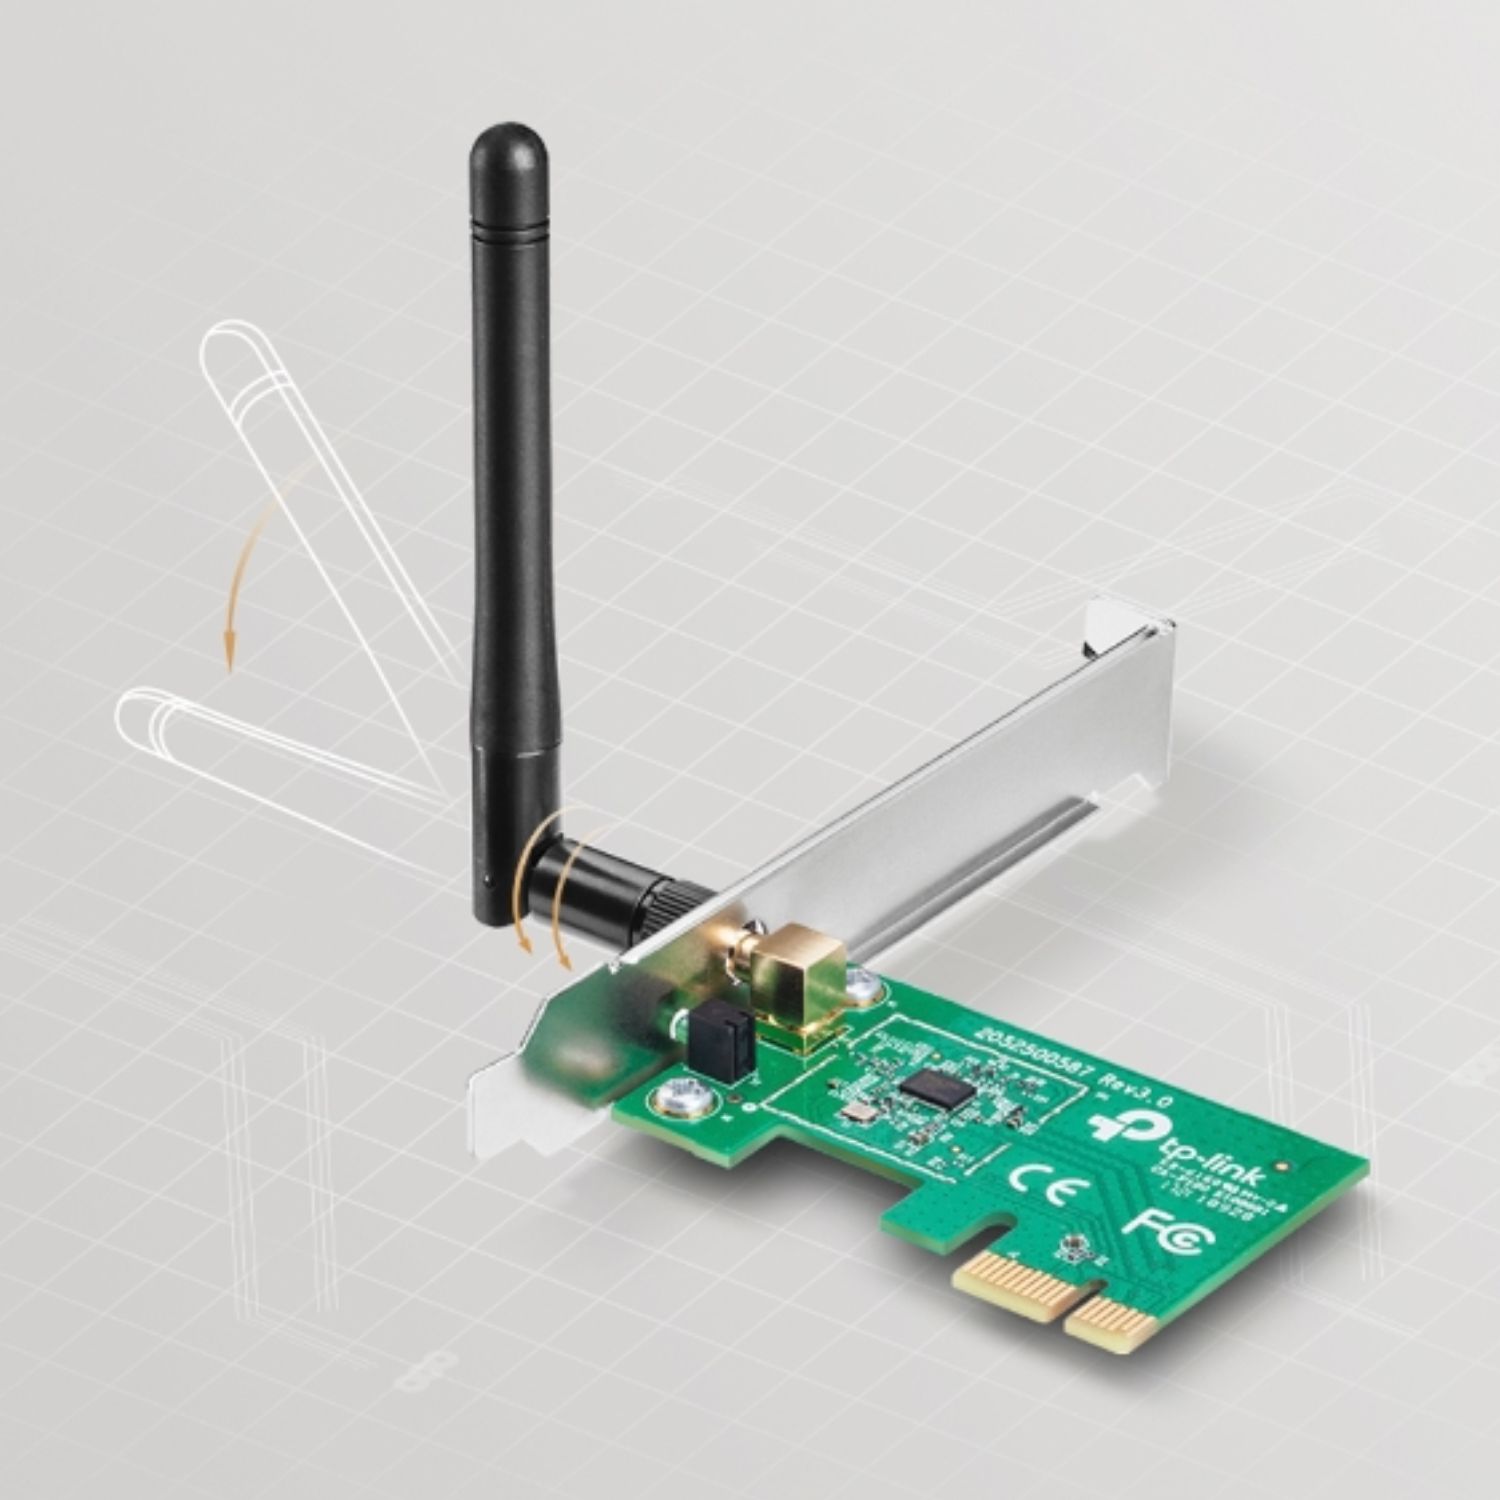 TP-Link TL-WN781ND N150 Wireless N PCI Express Adapter 2.4GHz (150Mbps) 802.11bgn 1x2dBi Detachable Omni Directional Antennas WPA/WPA2